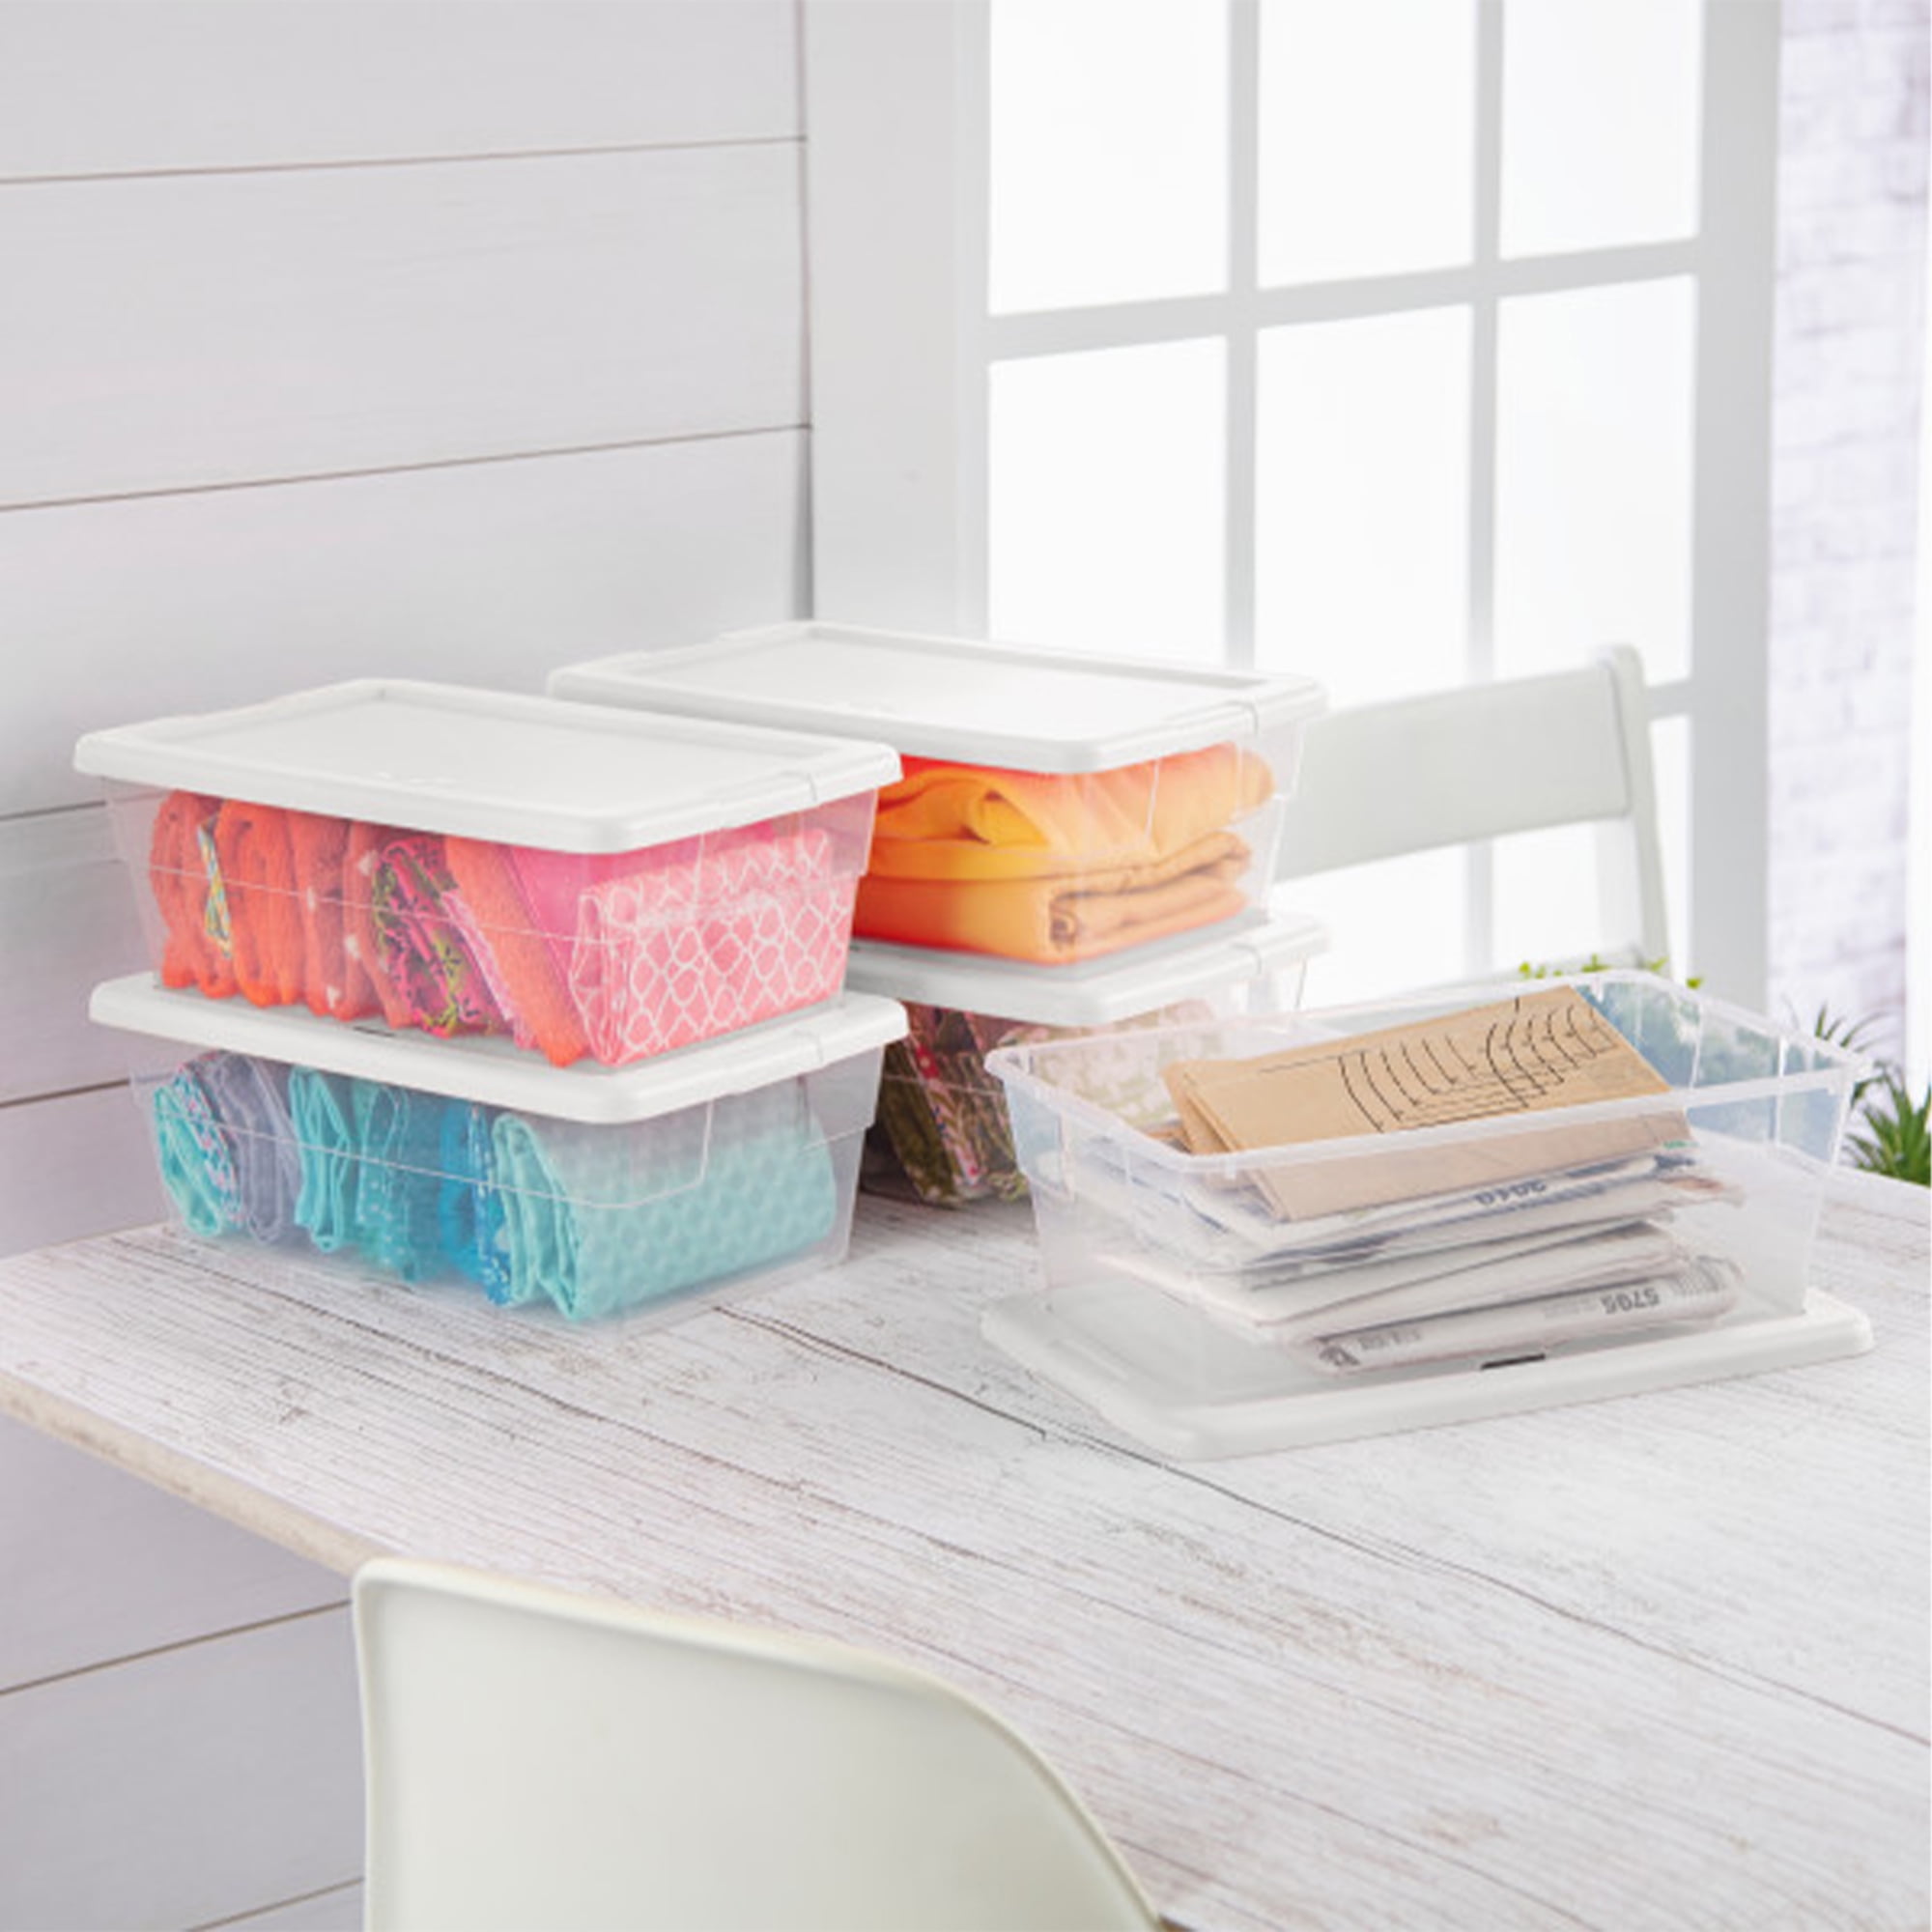 Sterilite 6-Pack Snack Plastic Bpa-free Reusable Food Storage Container Set  with Lid in the Food Storage Containers department at